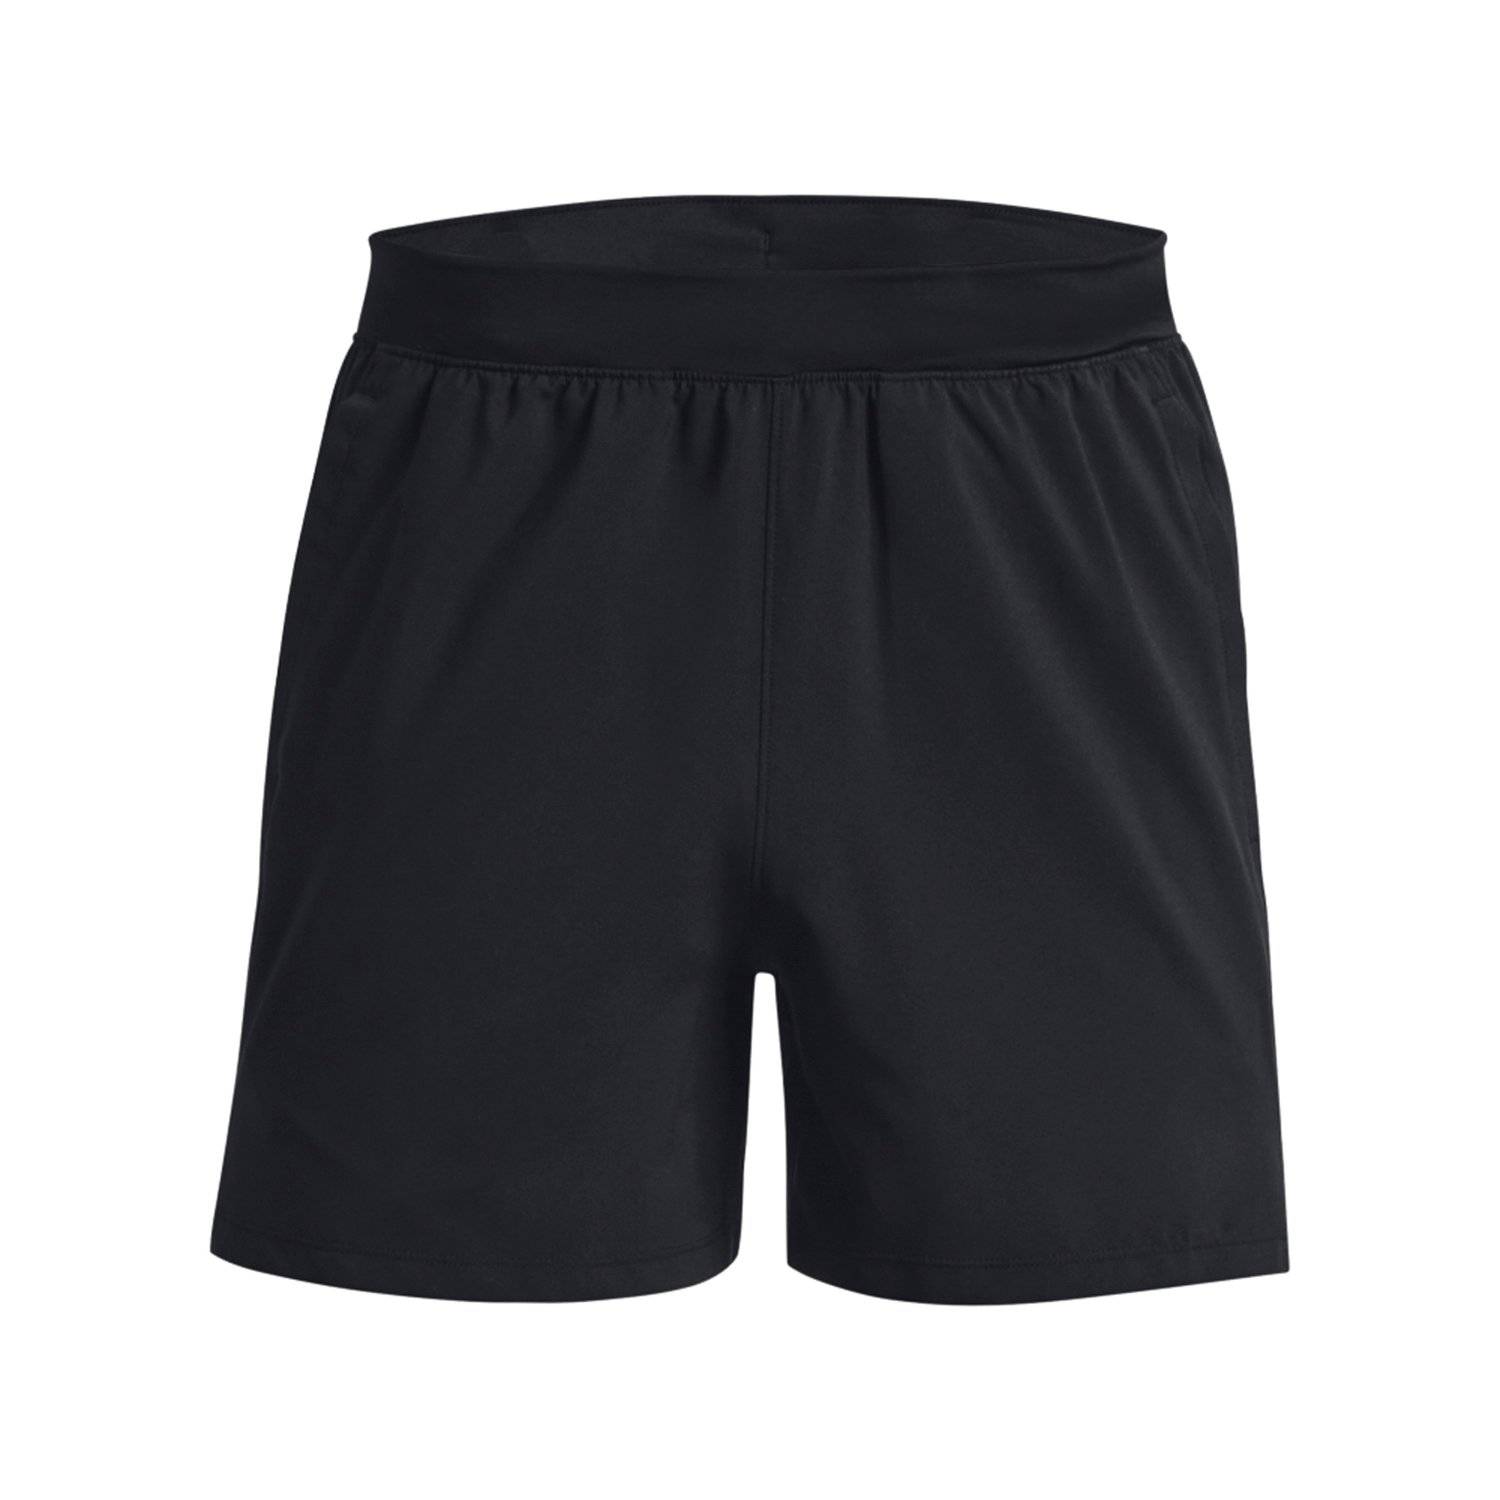 UNDER ARMOUR MENS TACTICAL ACADEMY 5" SHORTS